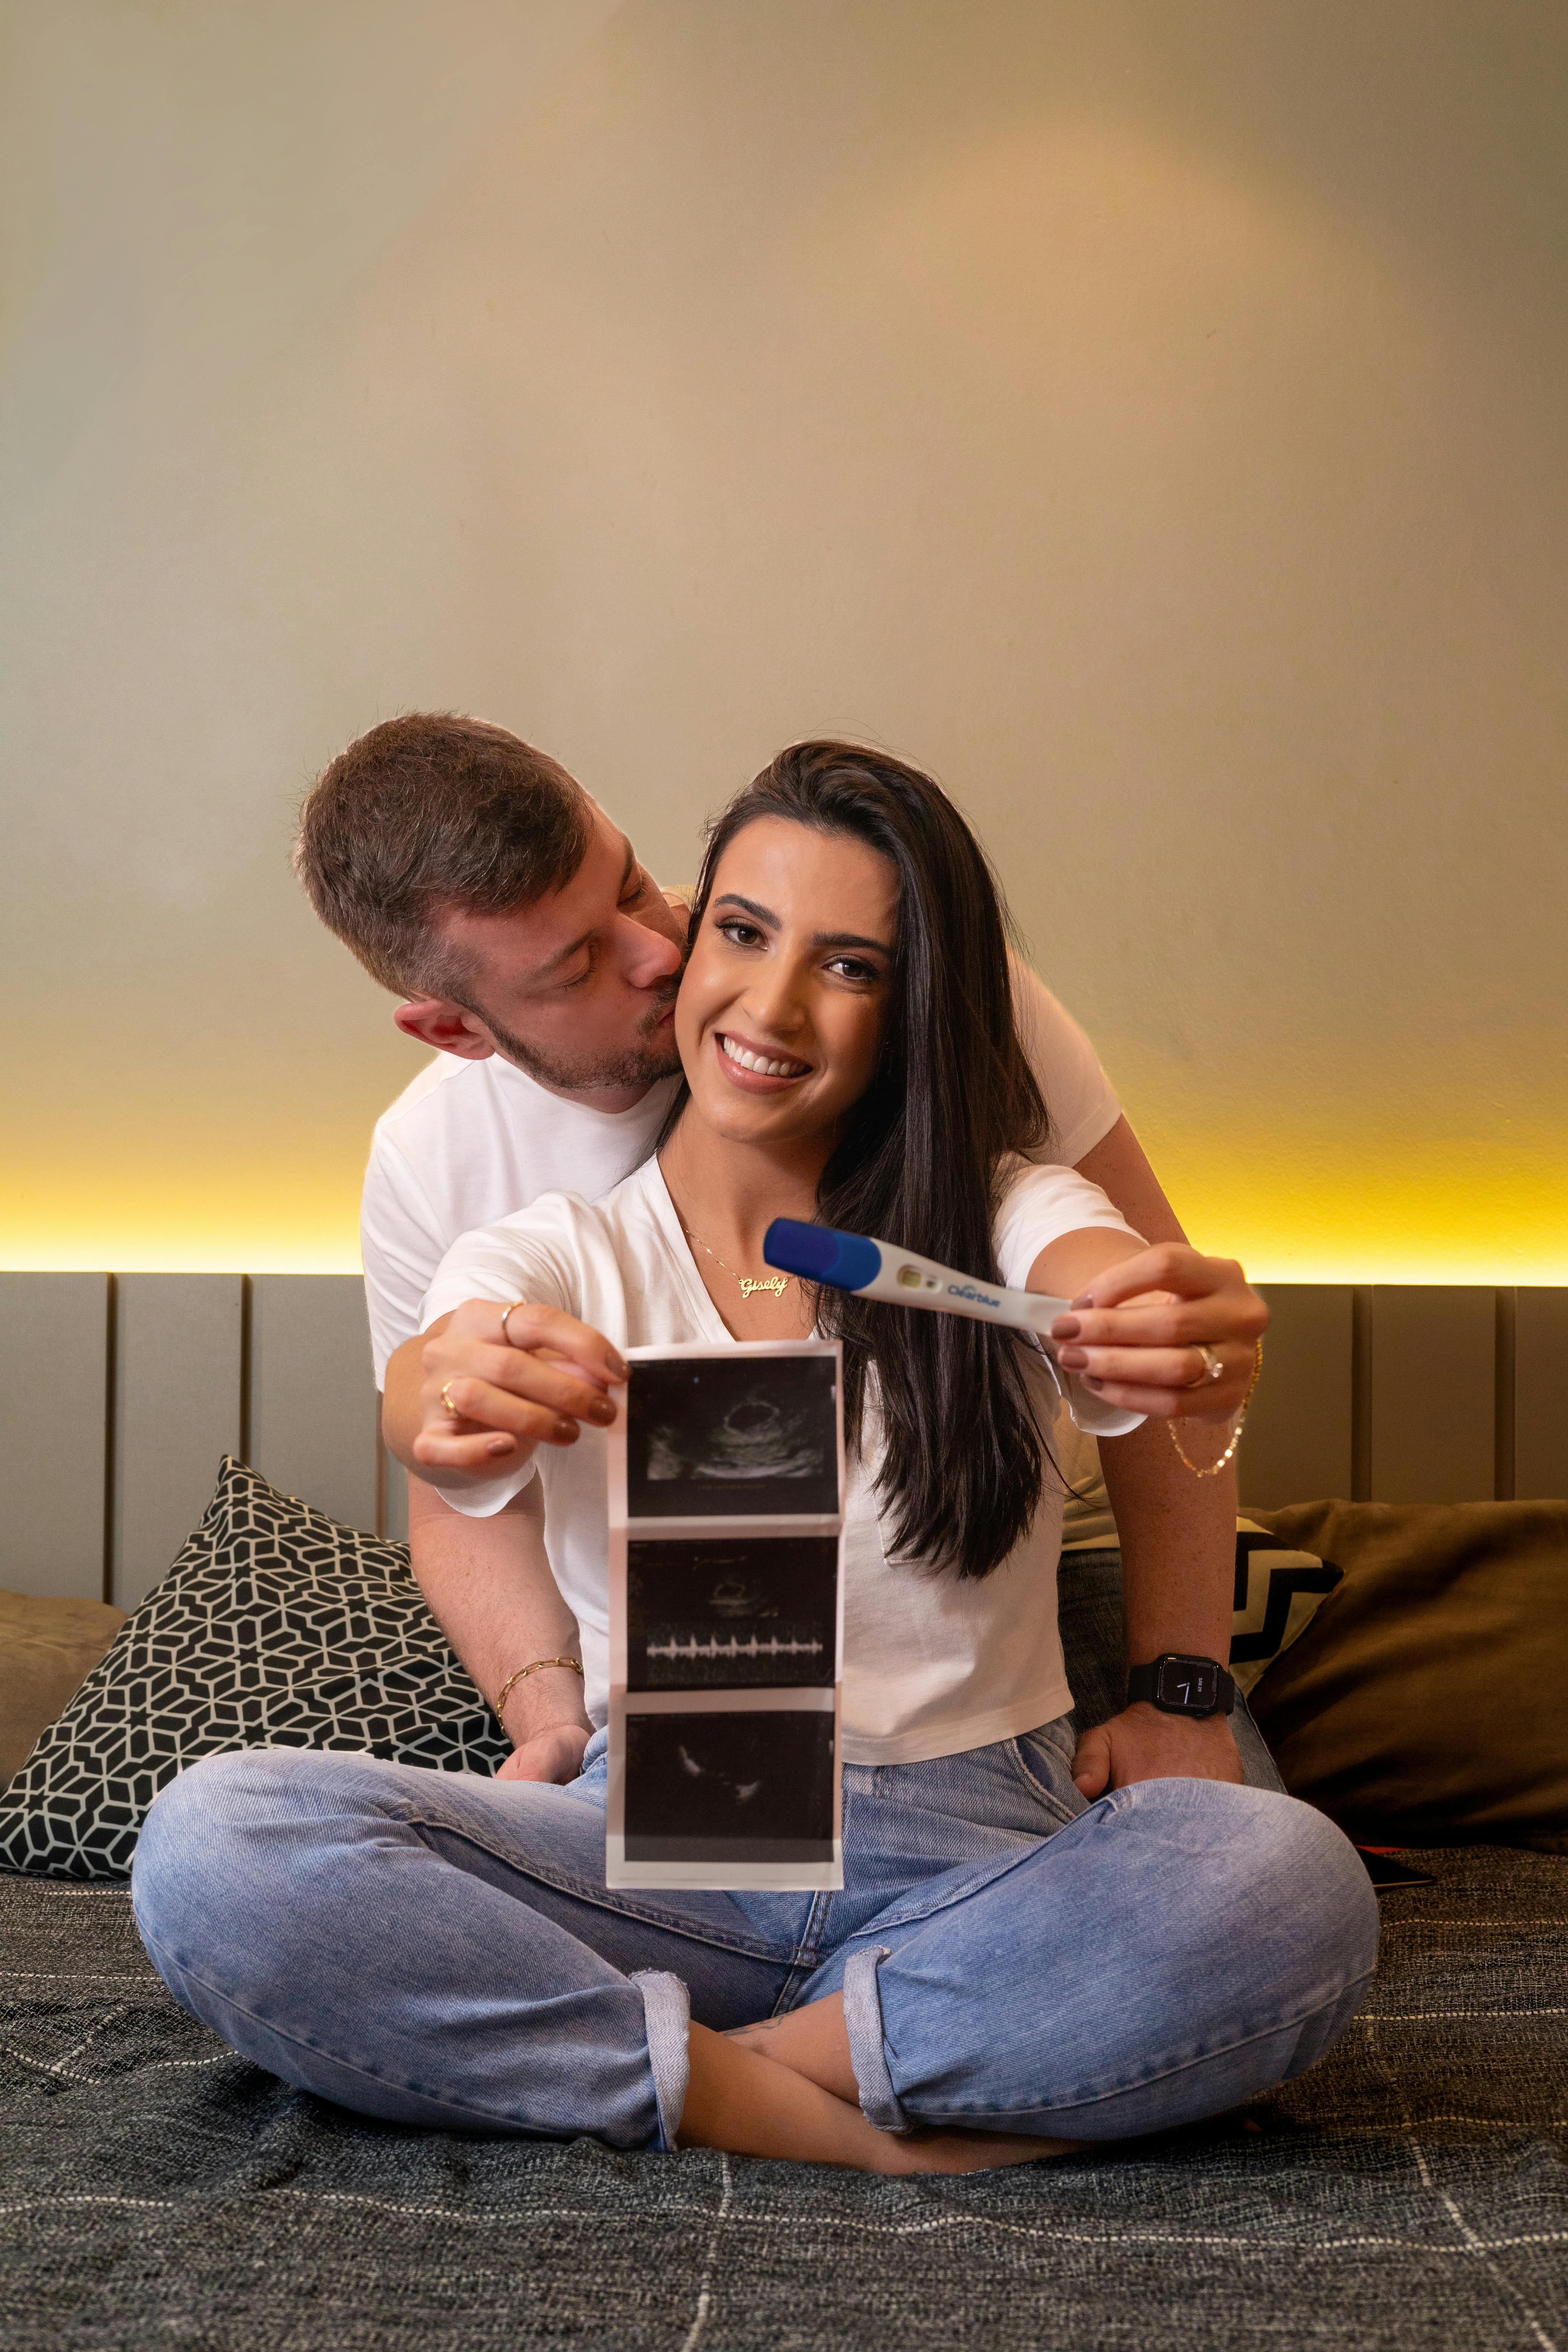 A young pregnant couple | Source: Pexels